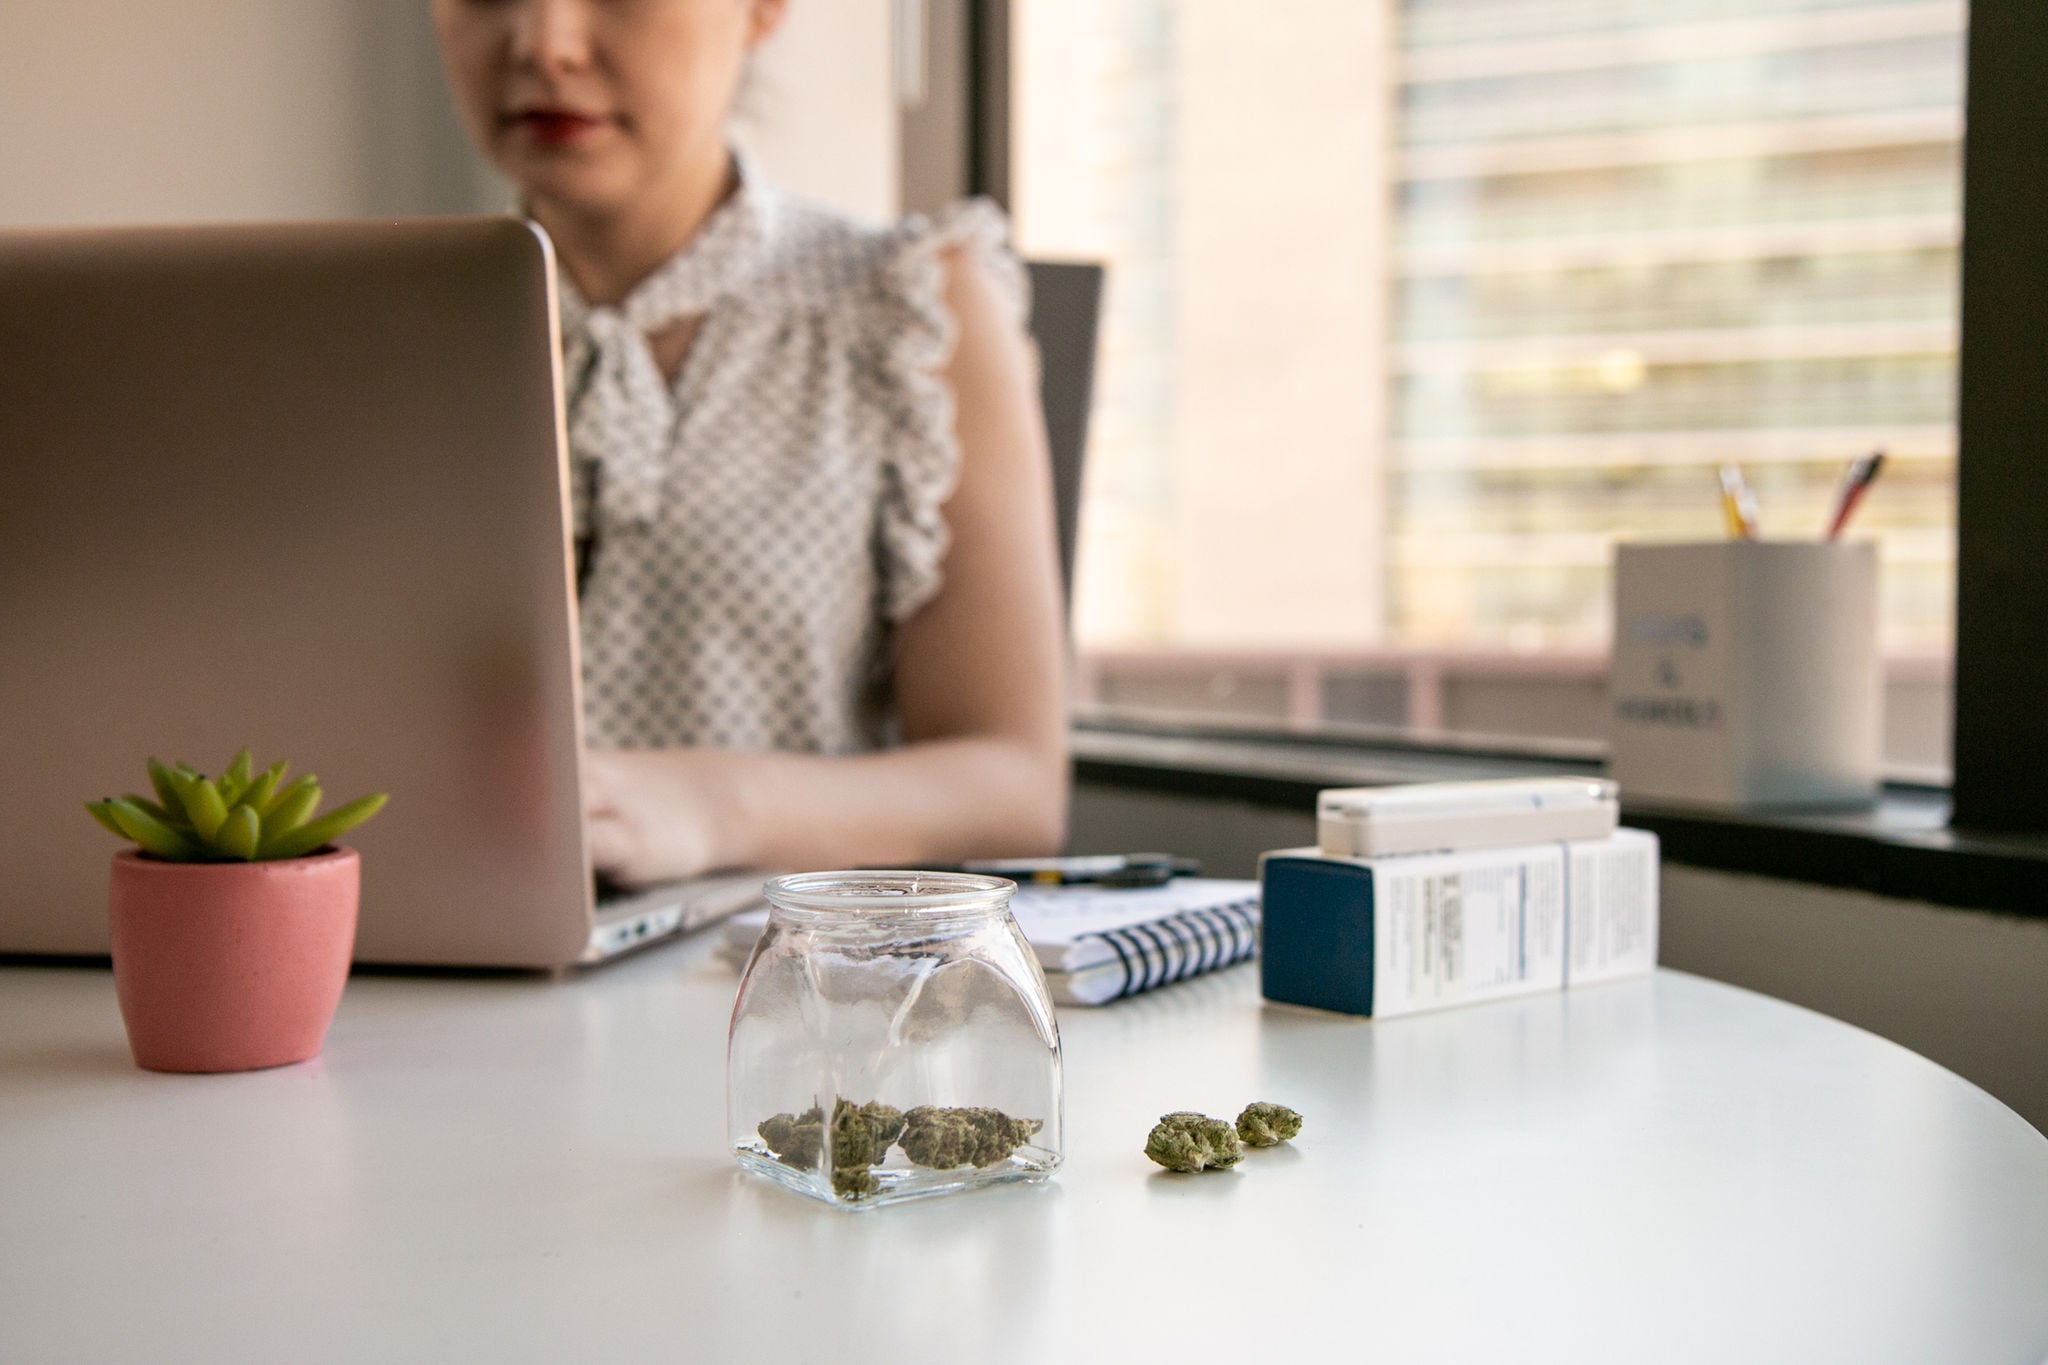 Marijuana and cannabis in the workplace